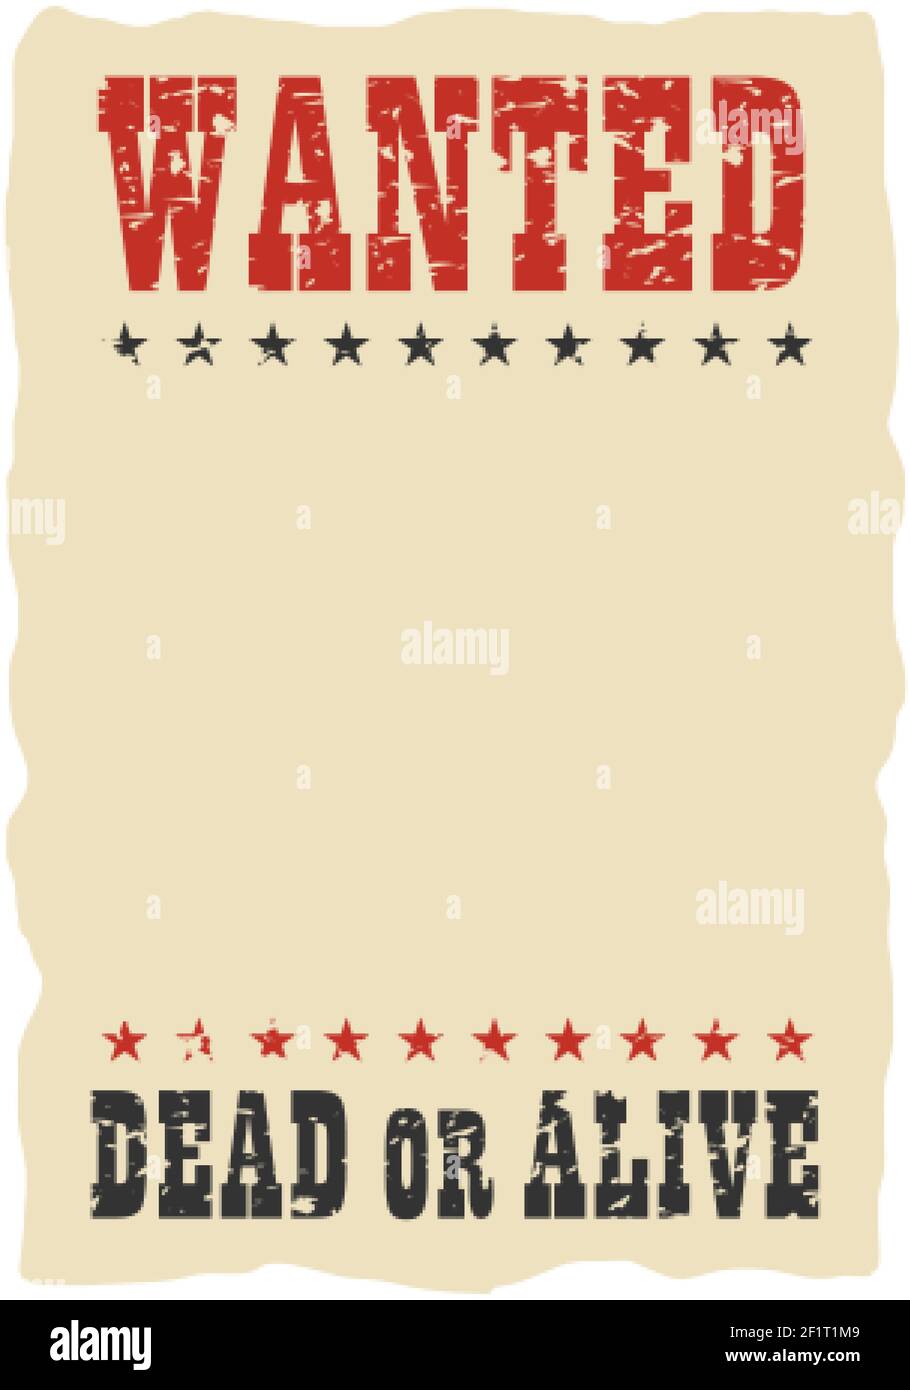 vintage-western-reward-placard-wanted-dead-or-alive-poster-template